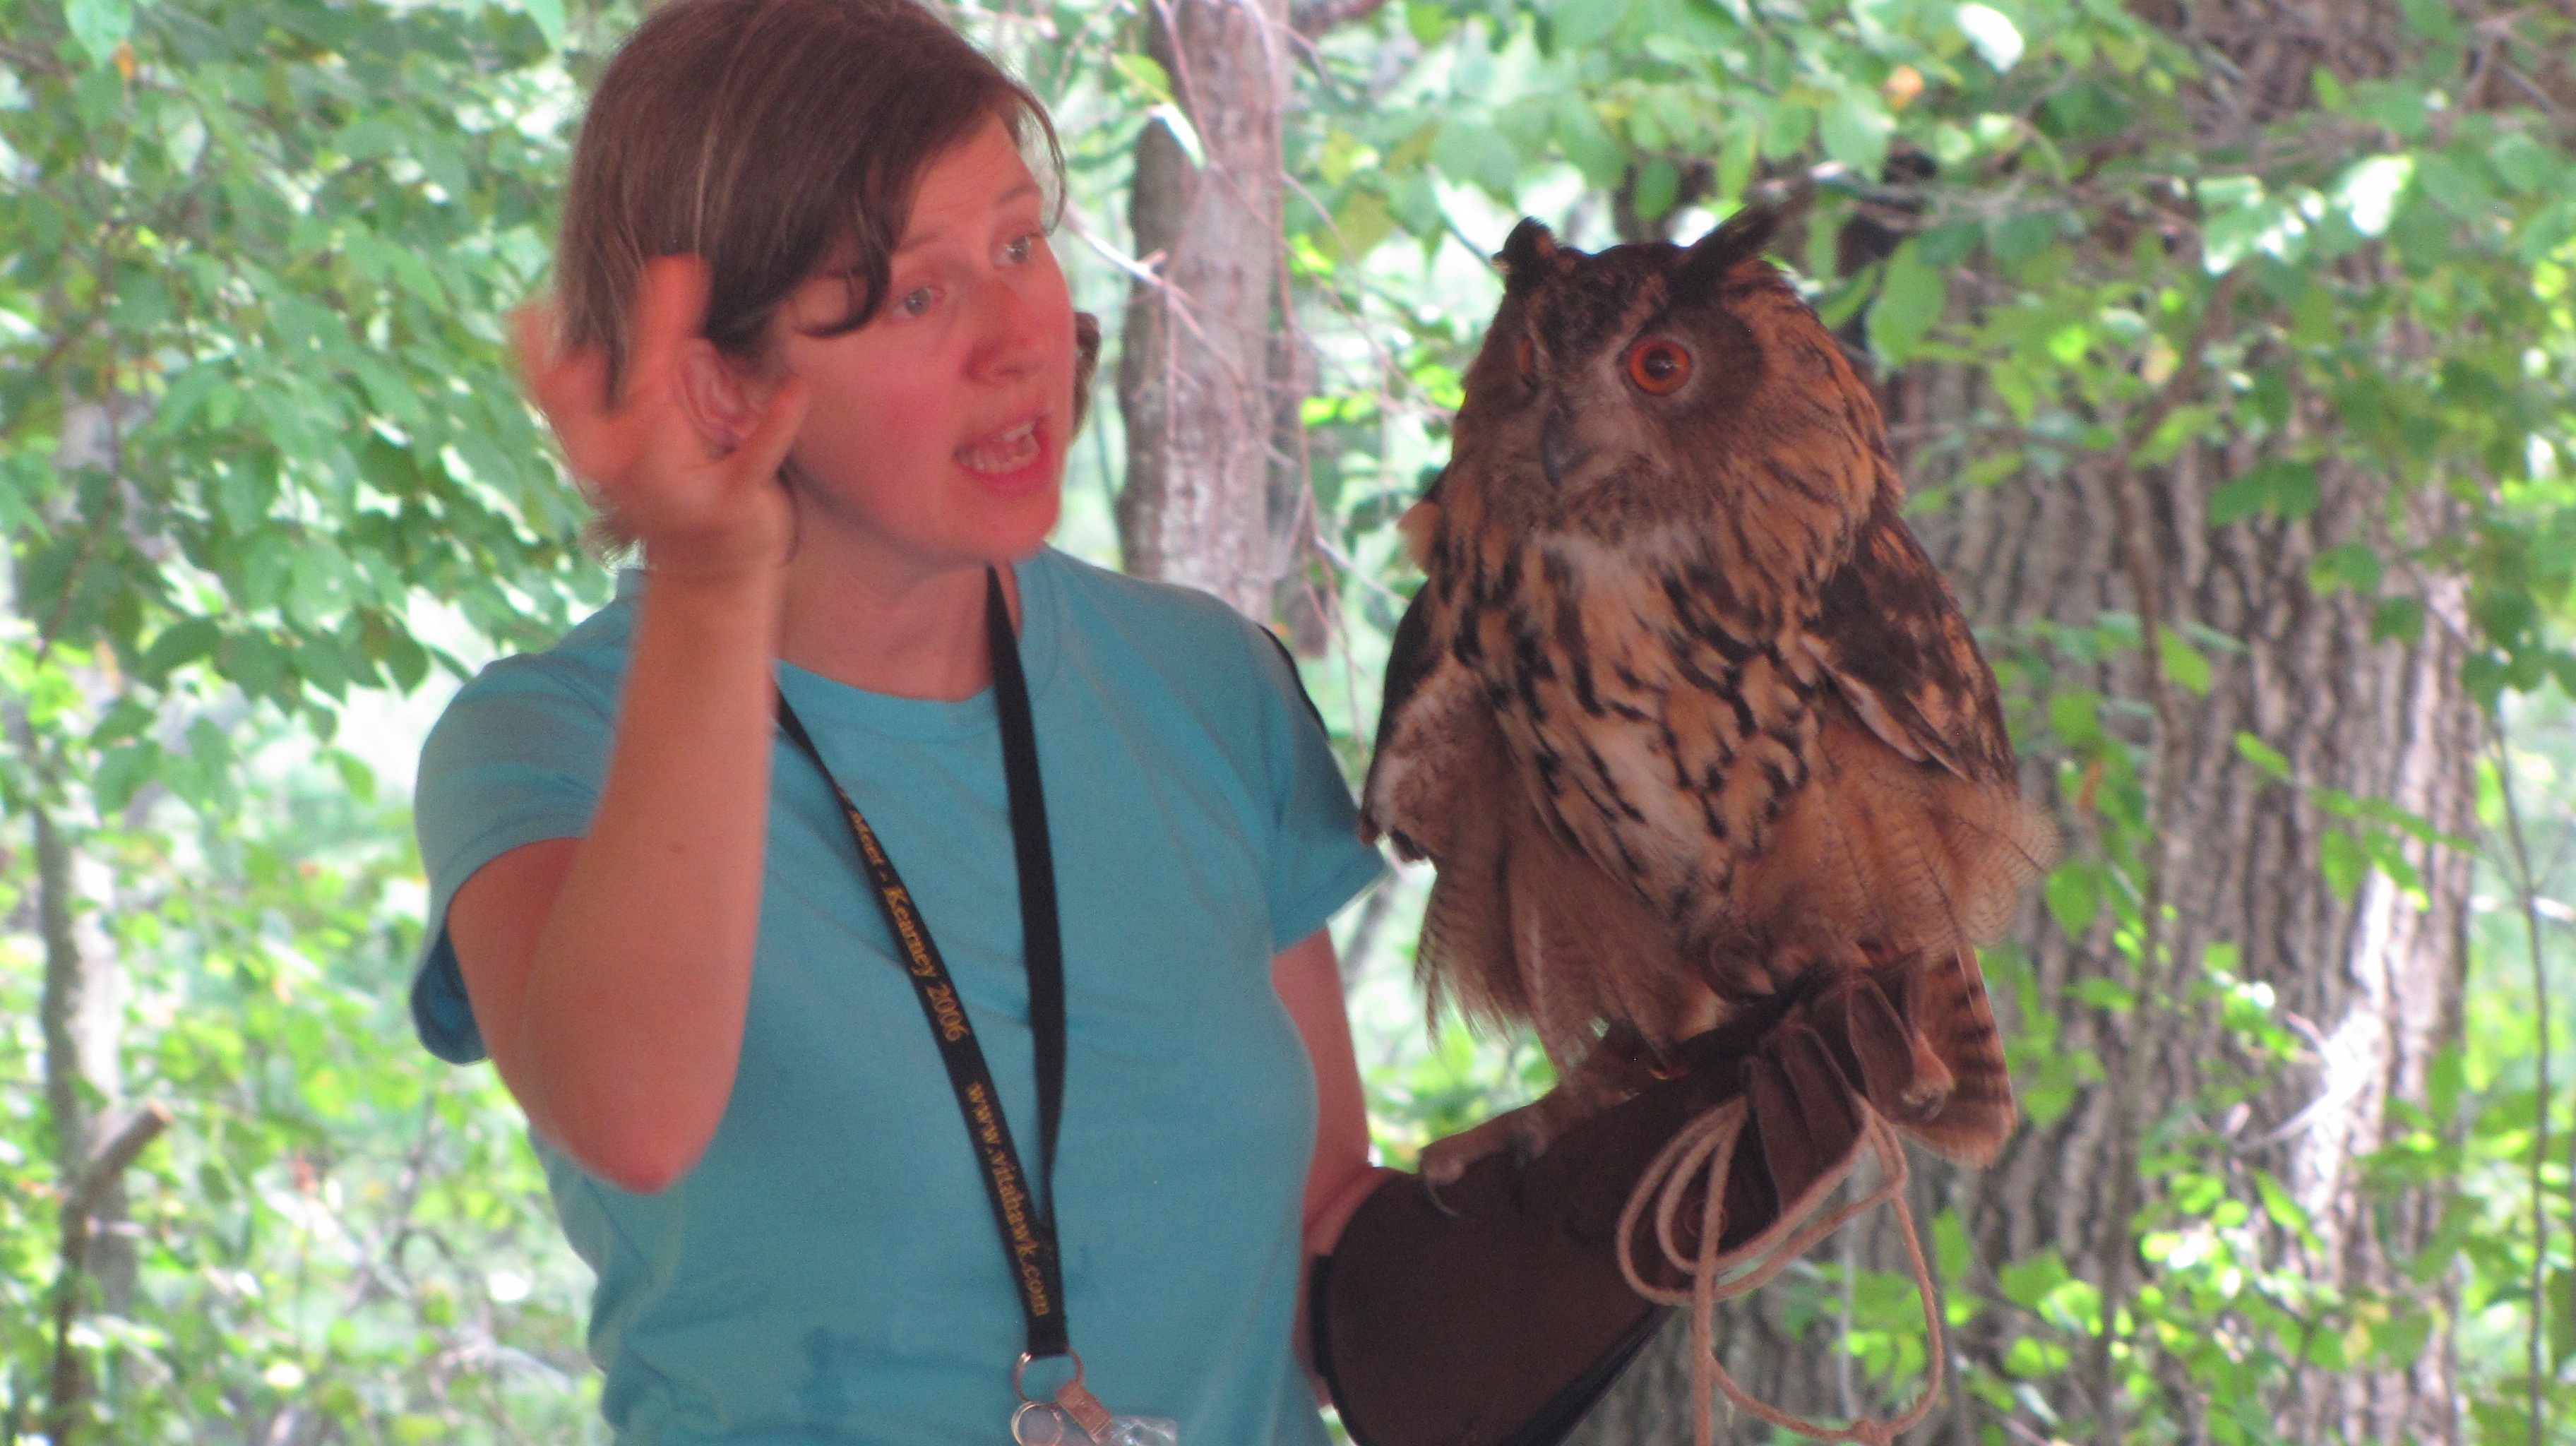 Woman holding an owl by its talons on her gloved hand.